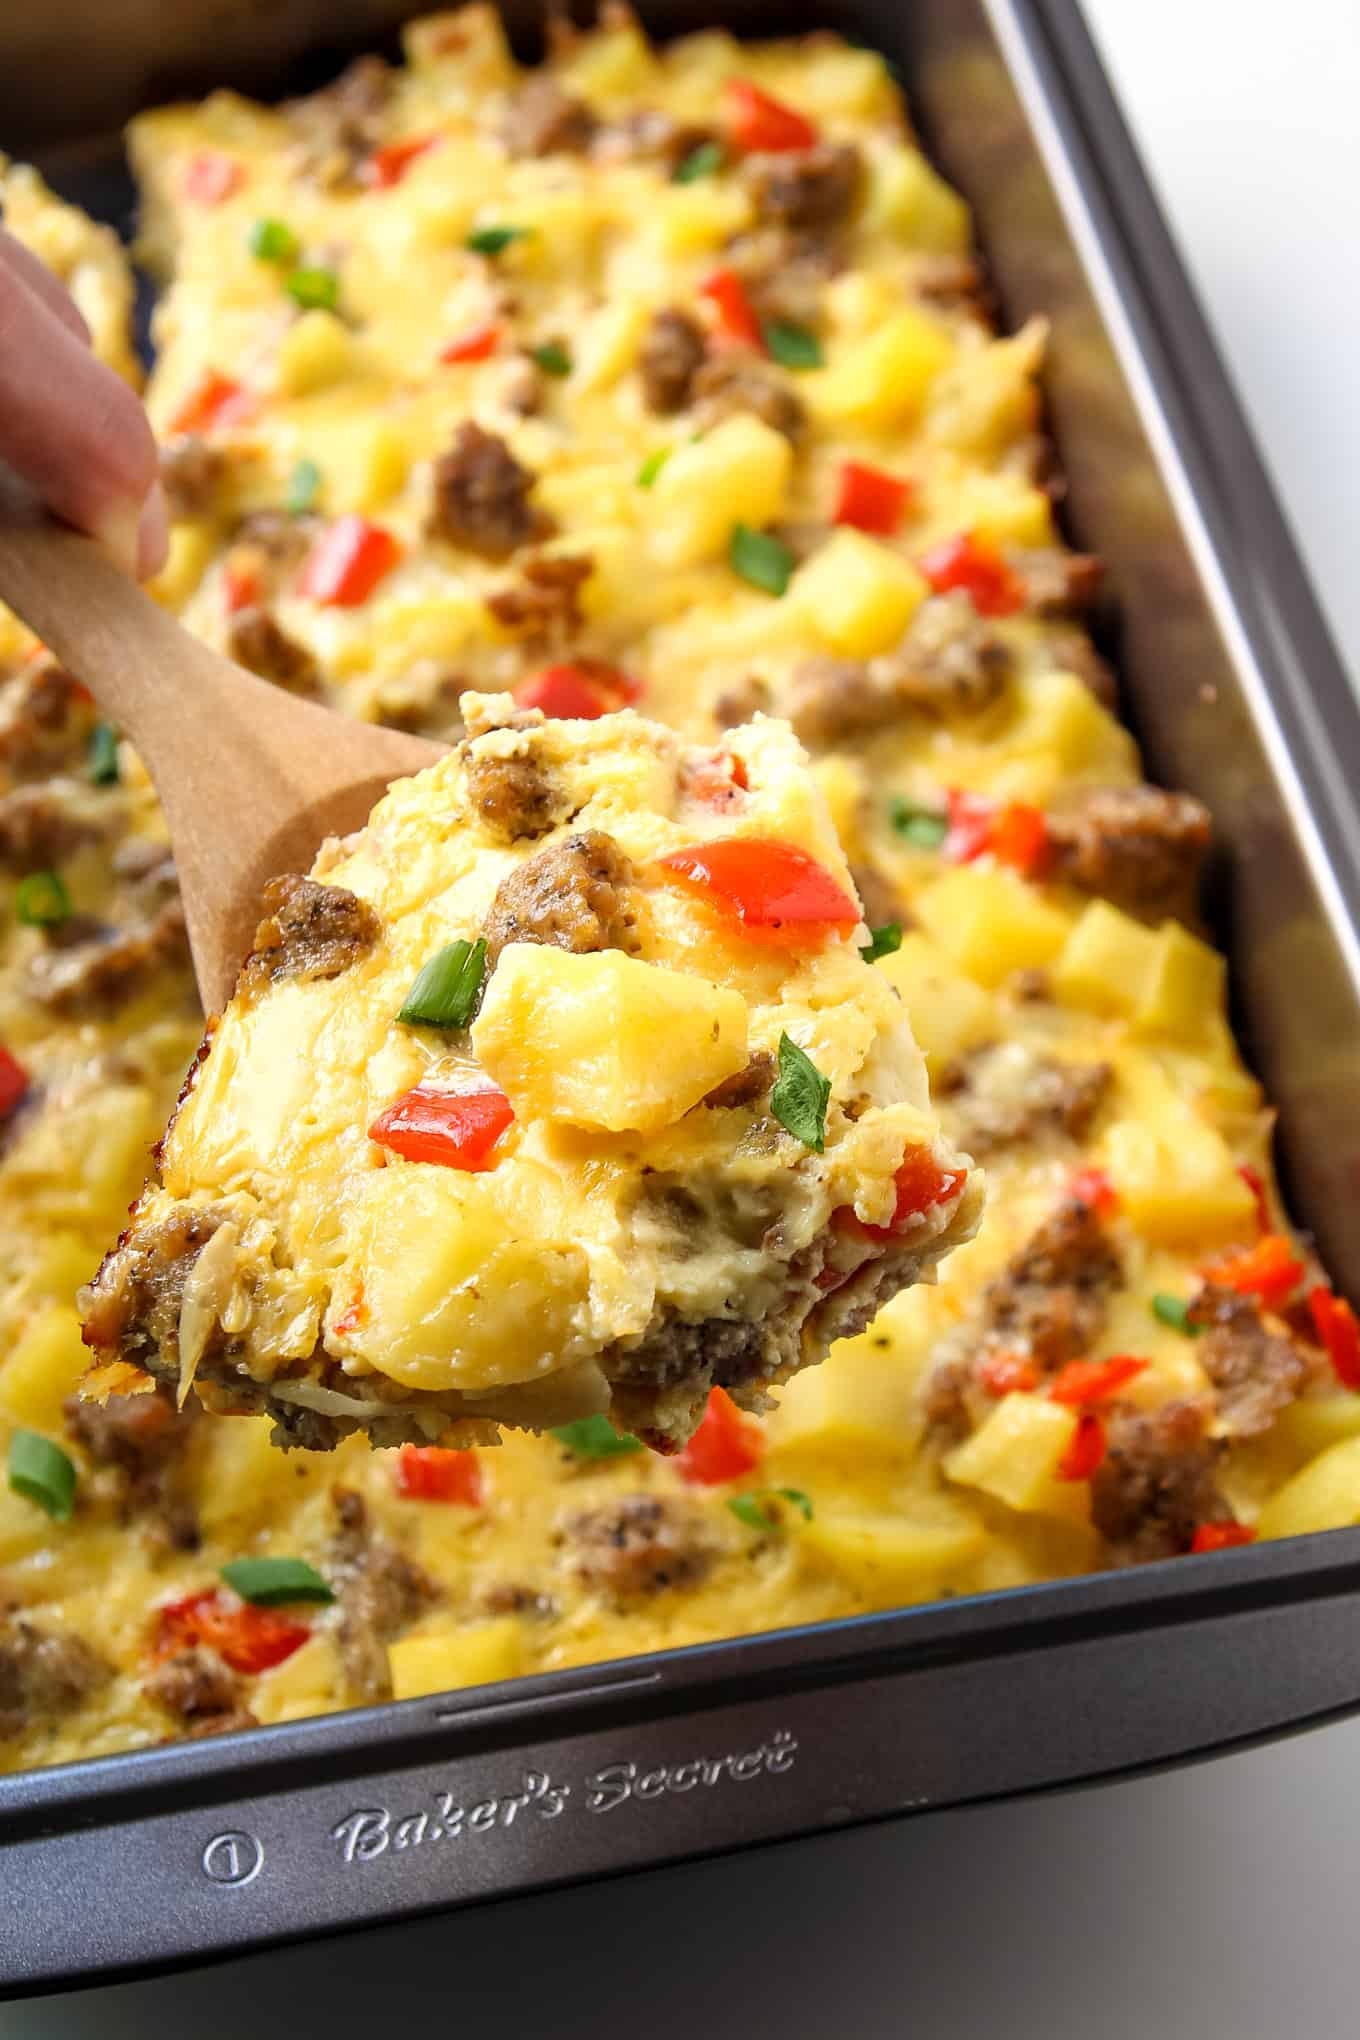 Eggs And Sausage Breakfast Ideas
 Breakfast Casserole with Eggs Potatoes and Sausage